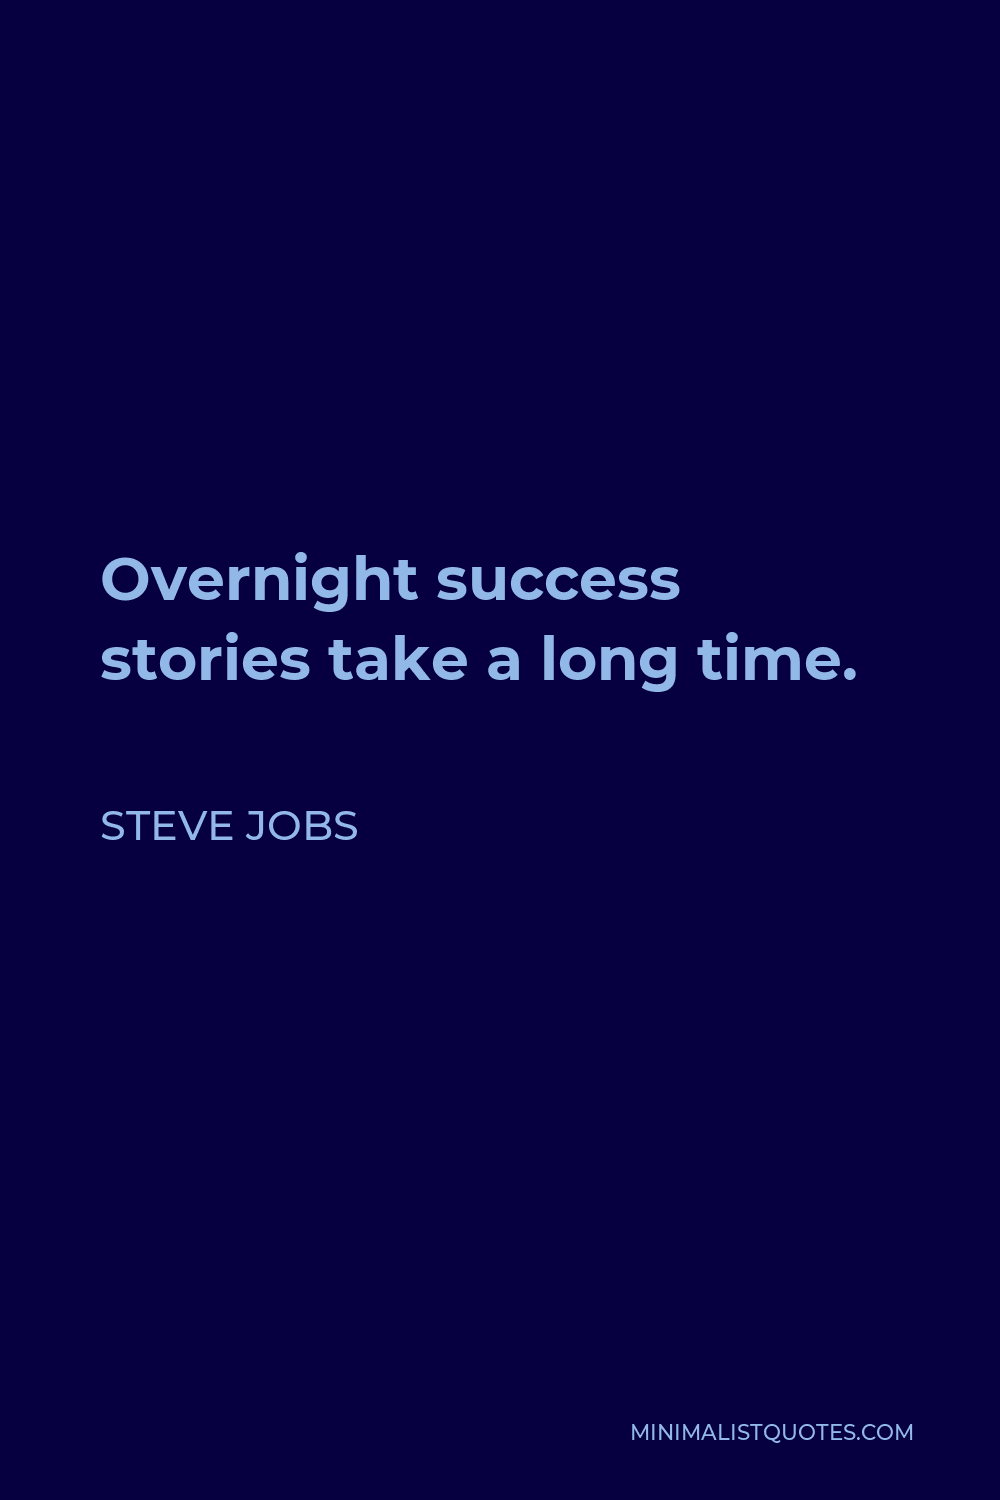 Steve Jobs Quote - Overnight success stories take a long time.